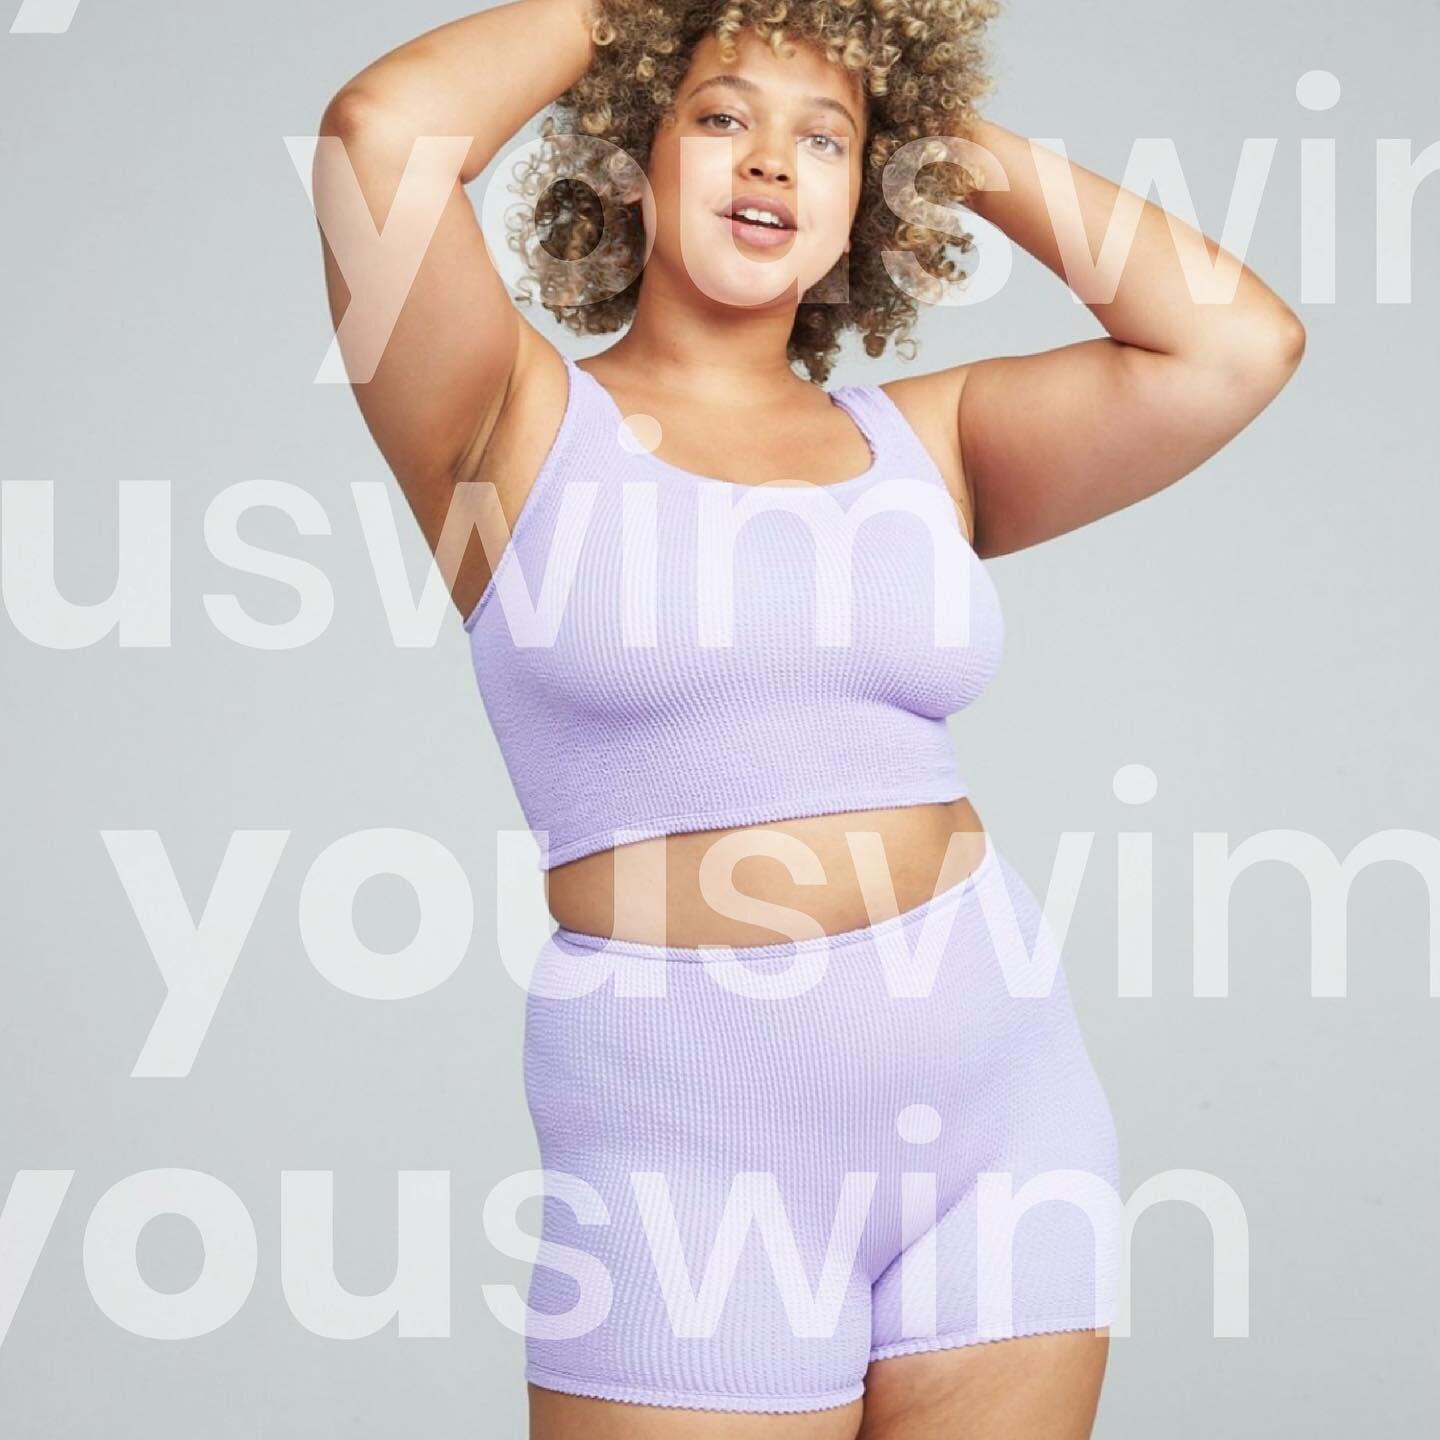 YOUSWIM&mdash;Swimsuits that mold to your bodies stories

Art Direction: Me
CW: Dan Jordan

[ Link in bio for full campaign ]
(student work @ D.A.D.)